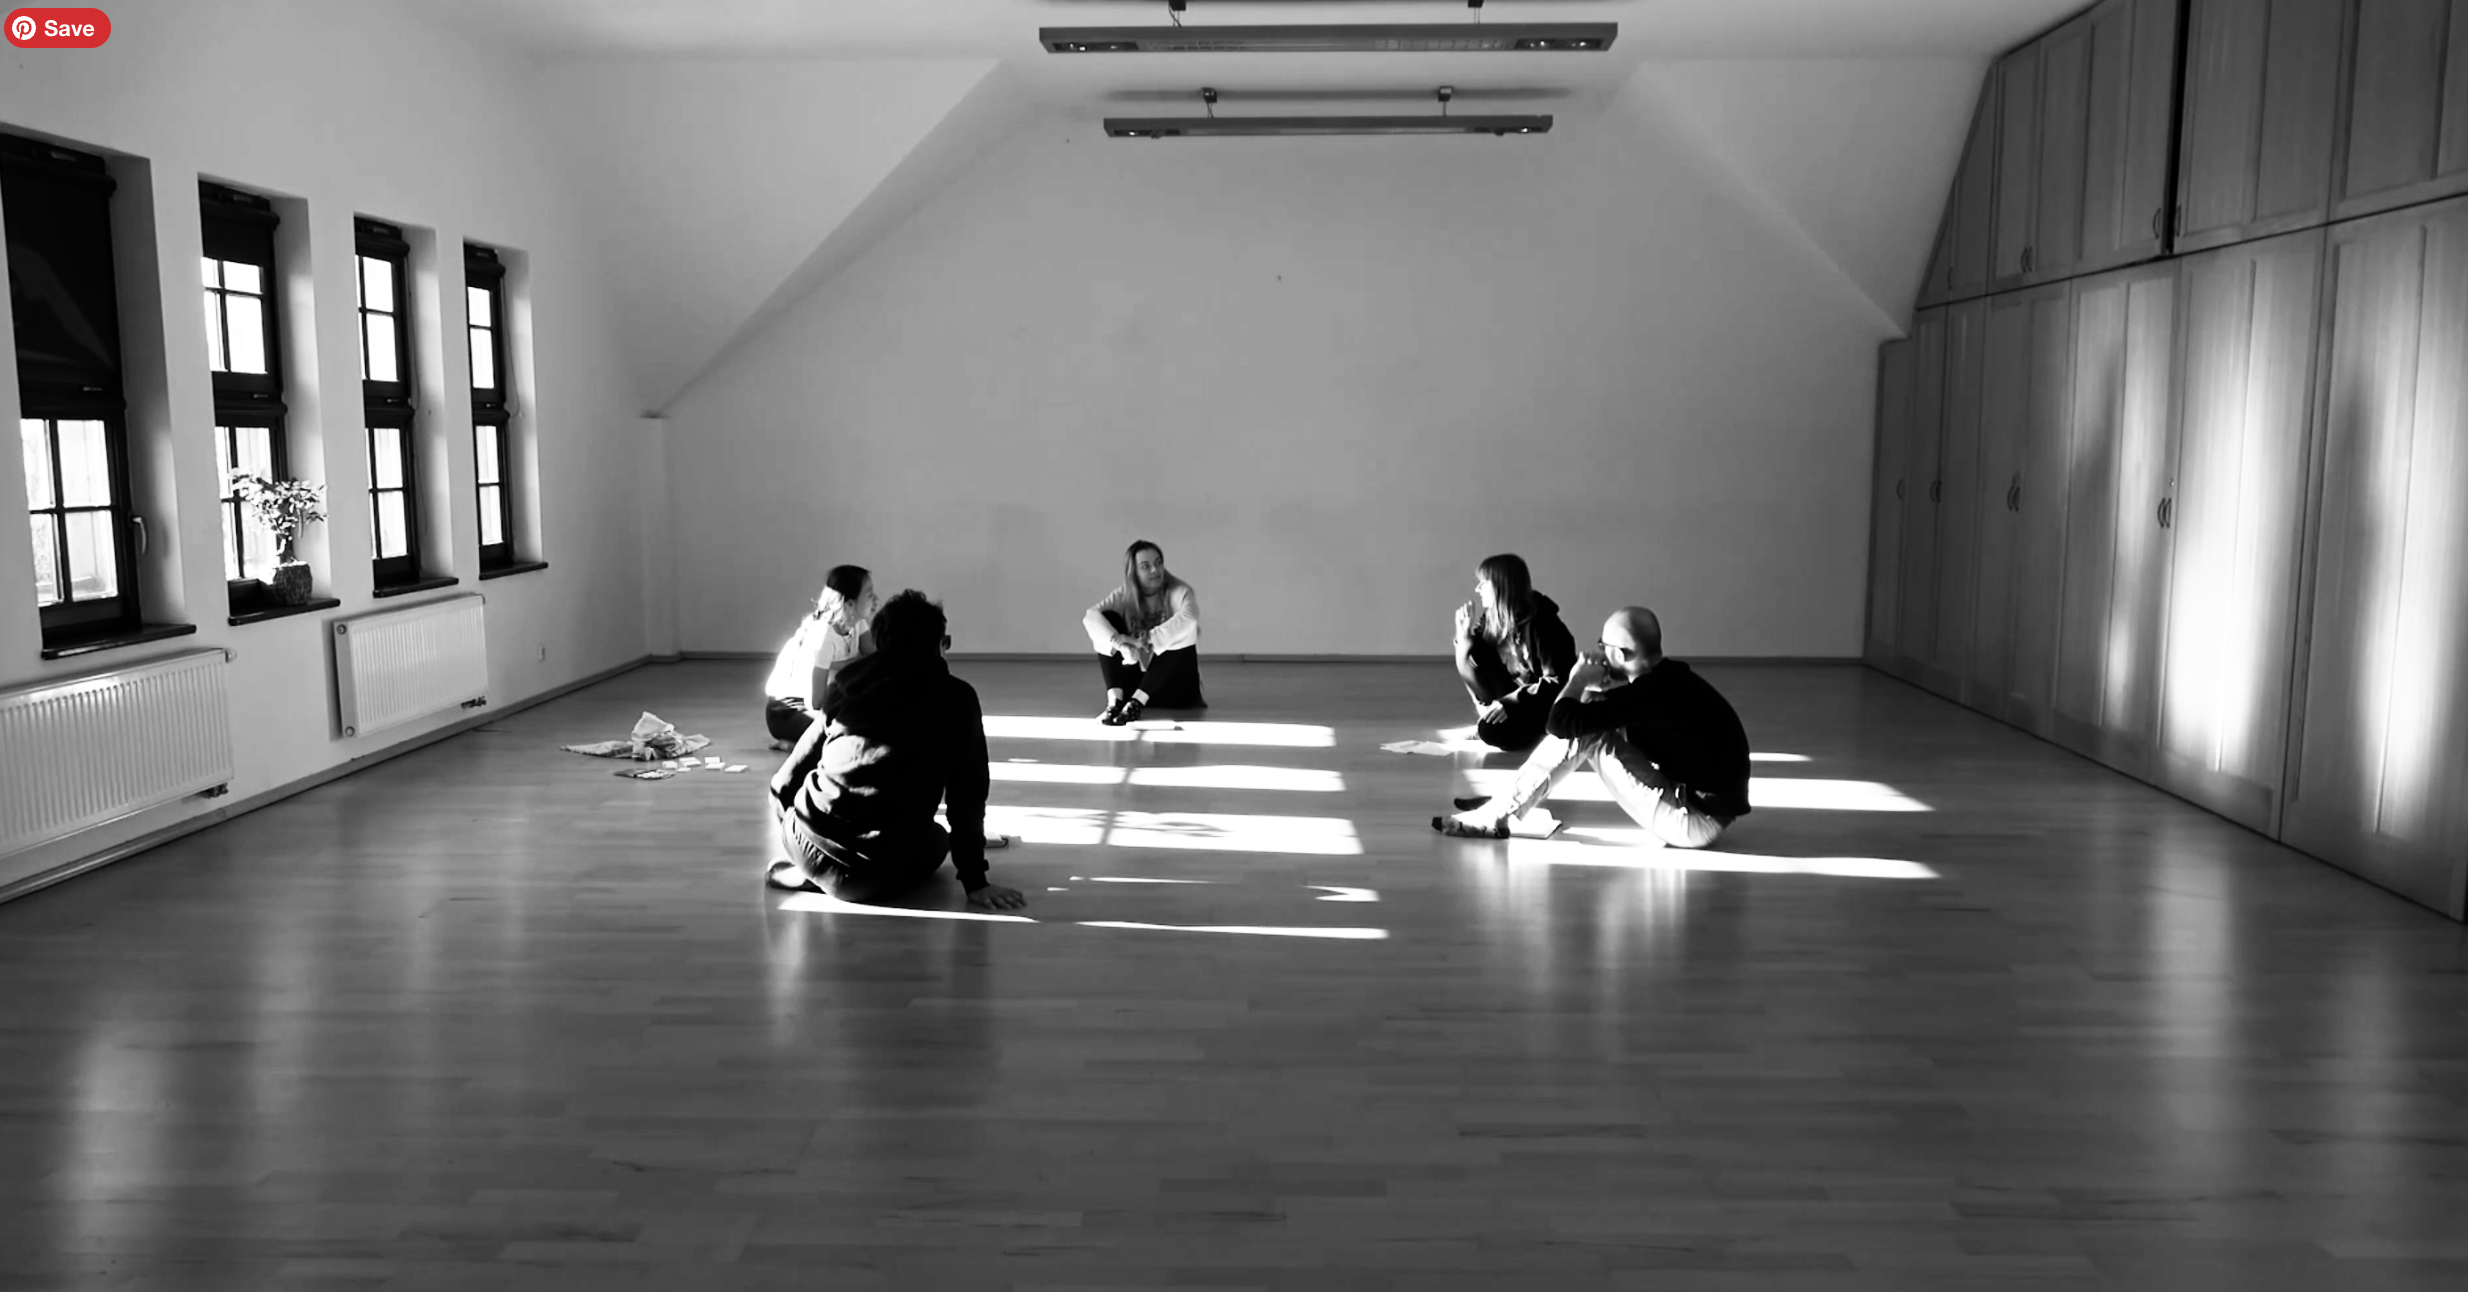    Five people sat on the floor of a studio, having a conversation.   